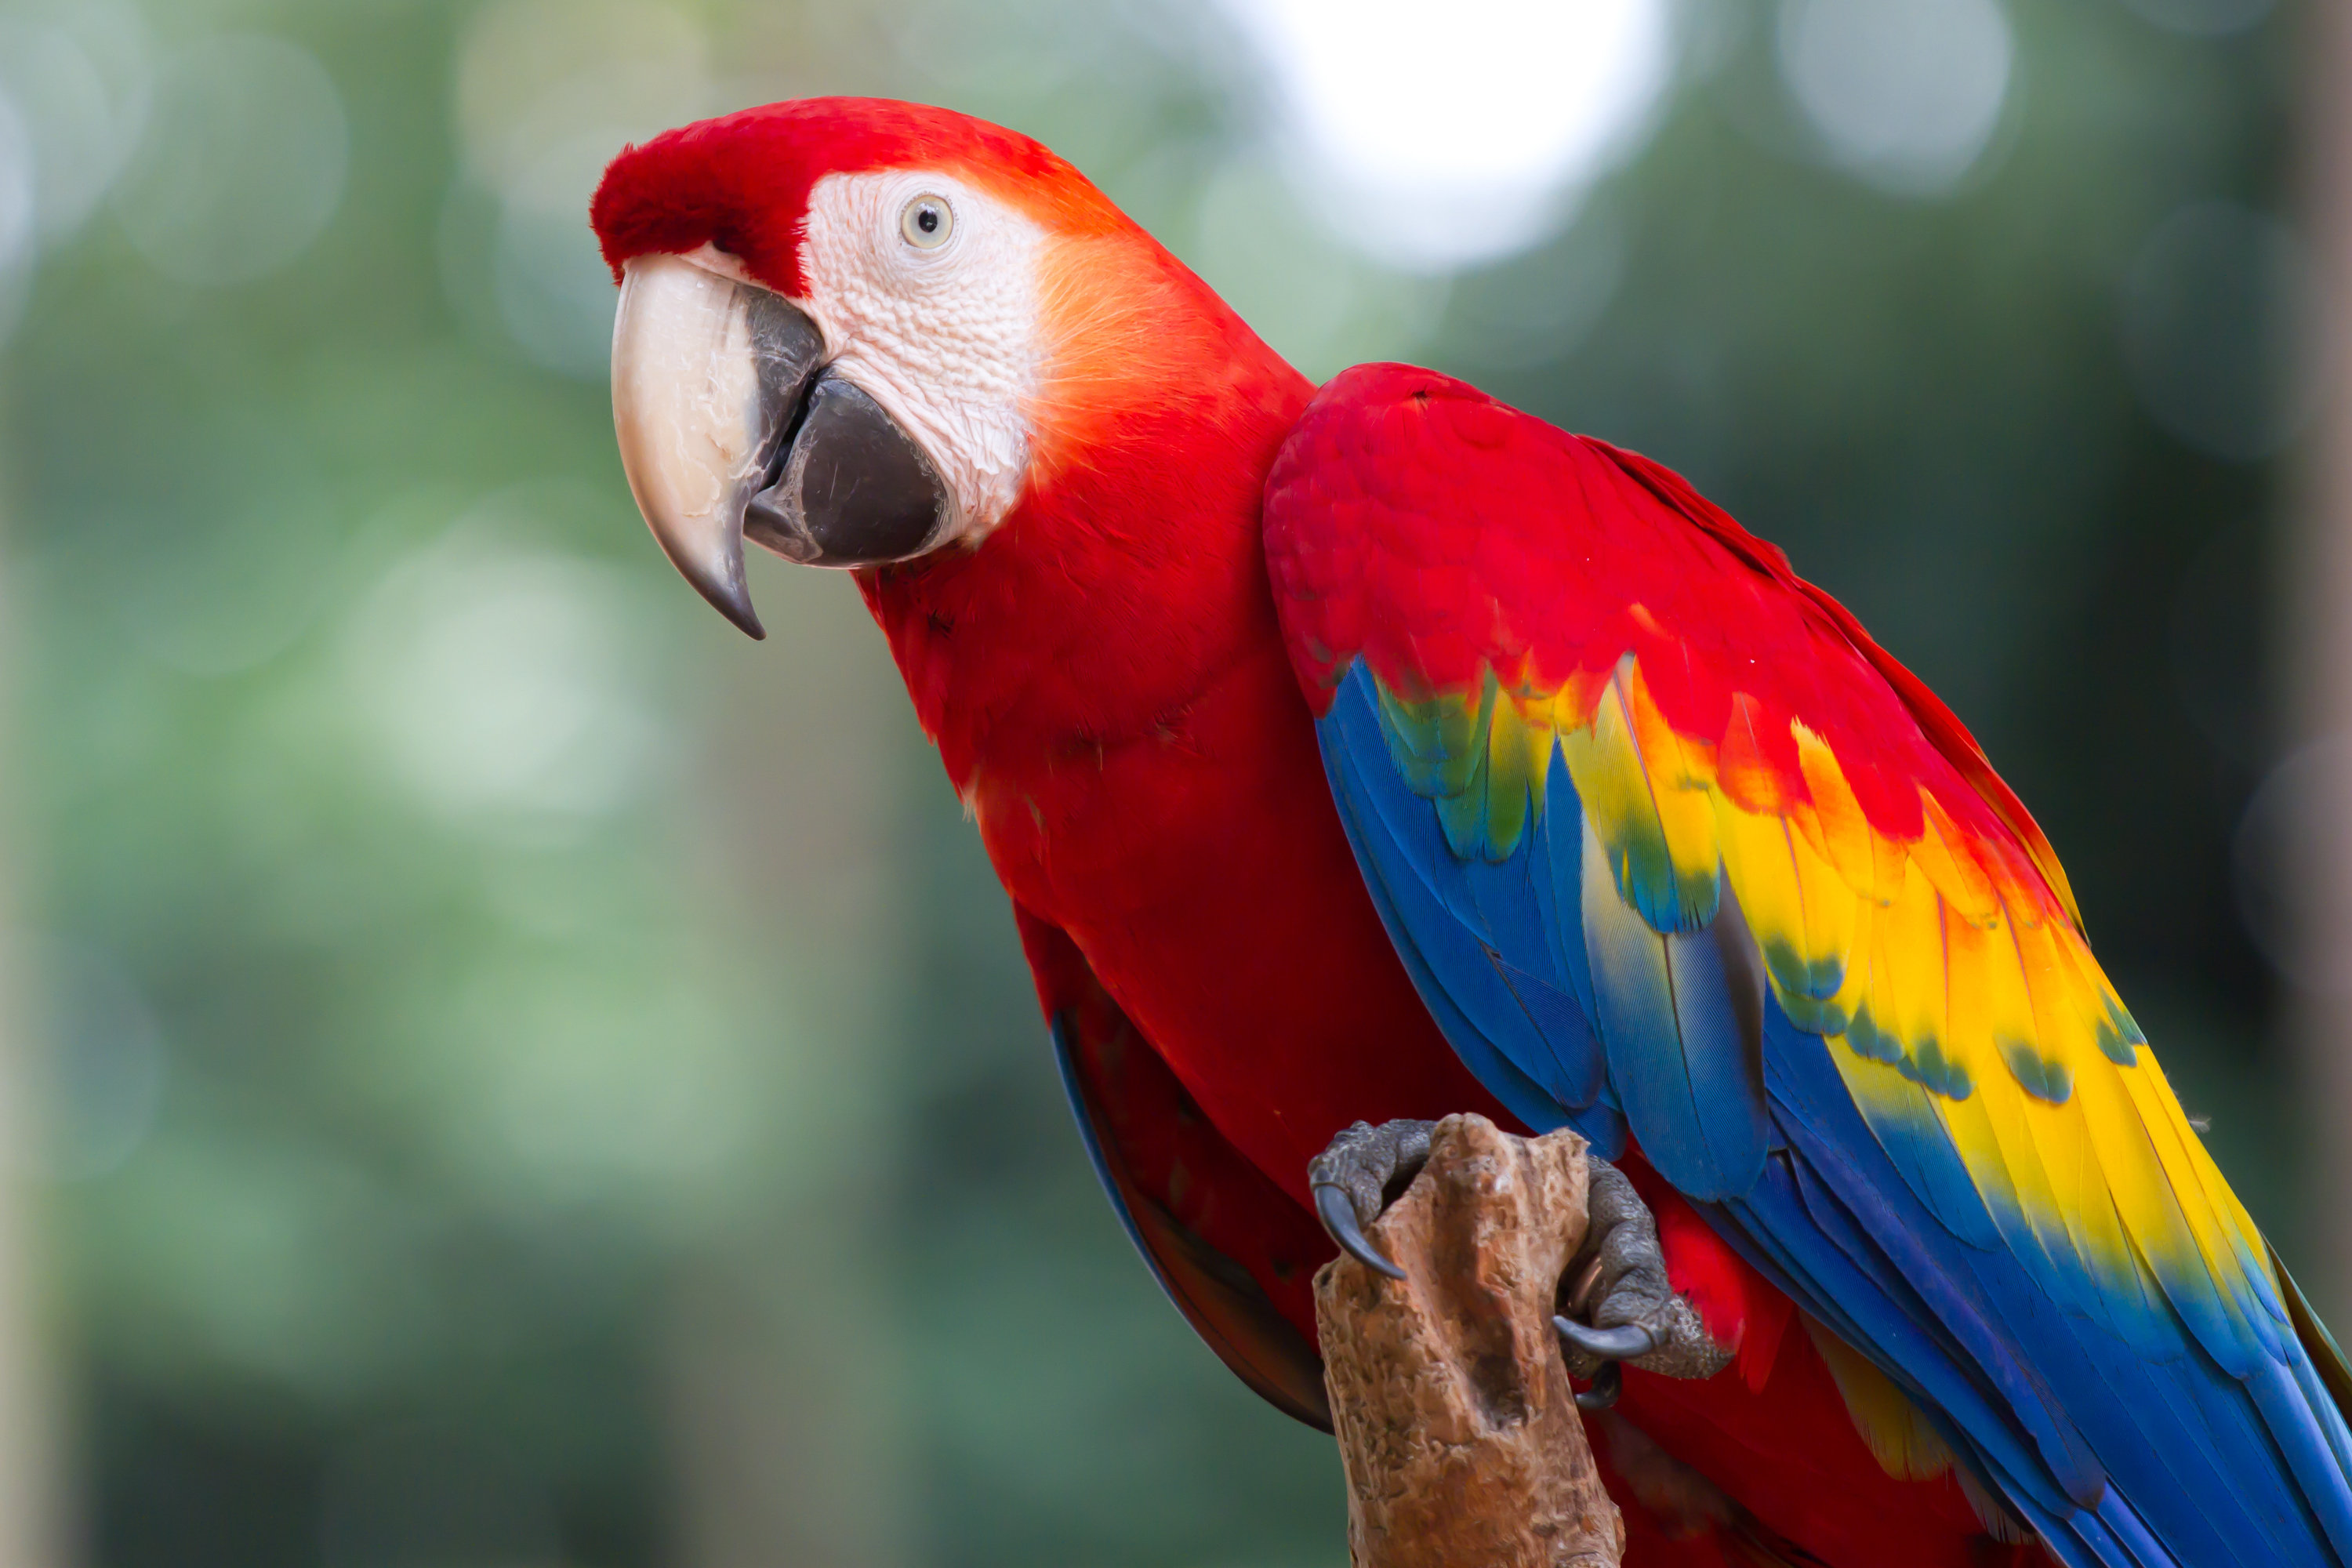 Bay Isle Home Red Parrot (Macaw) - Wrapped Canvas Photograph | Wayfair.co.uk